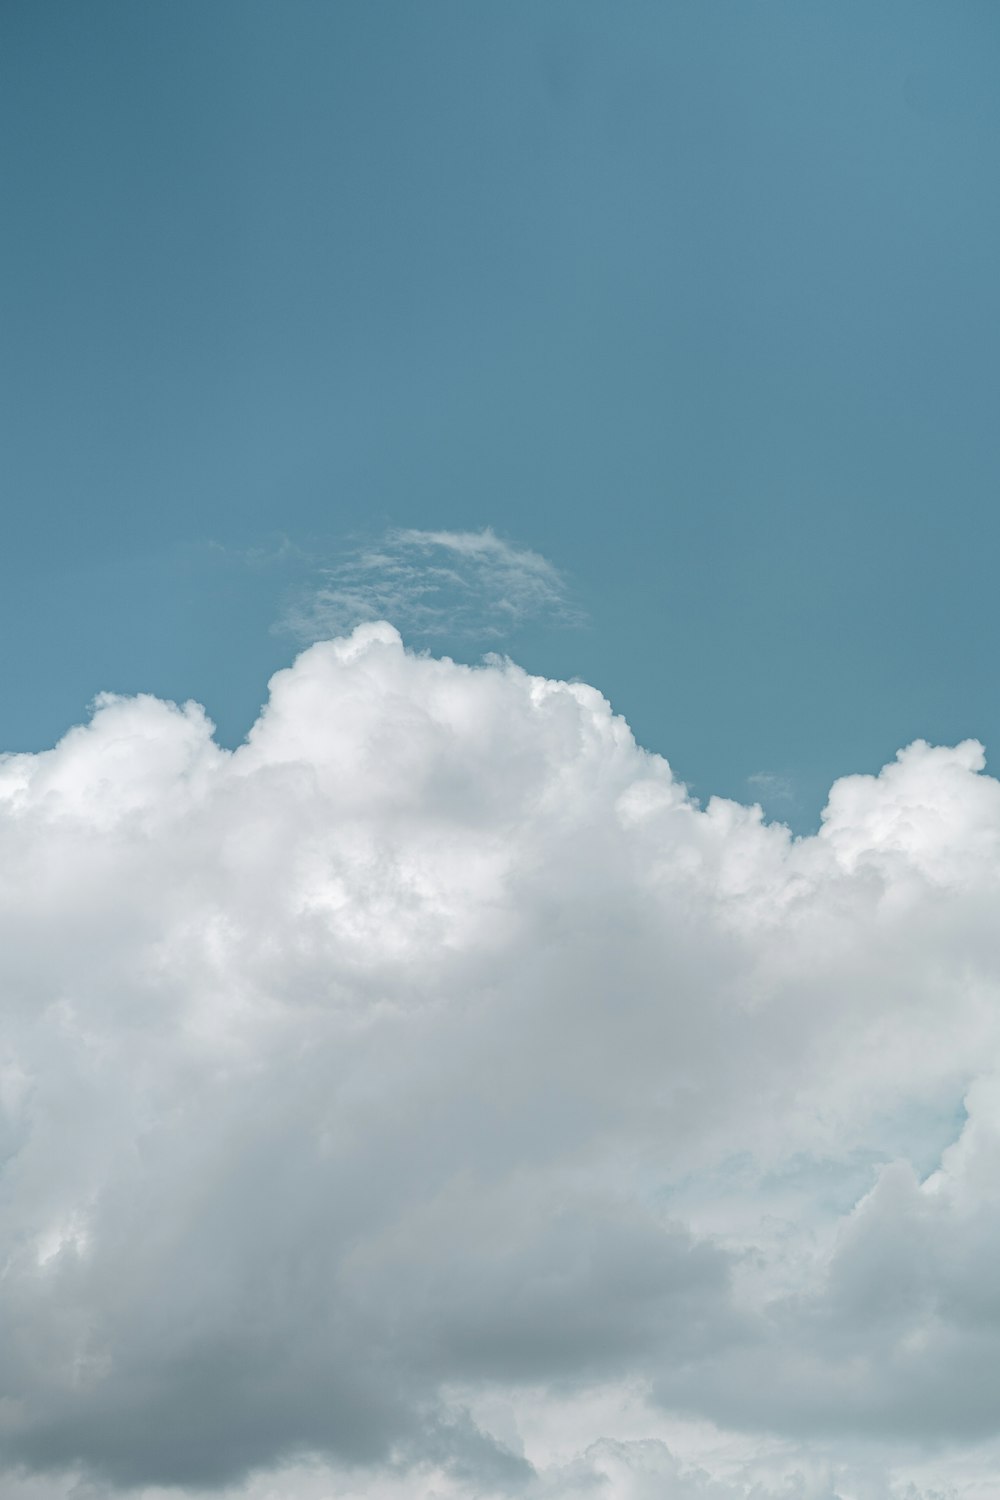 Clouds Wallpaper Pictures | Download Free Images on Unsplash